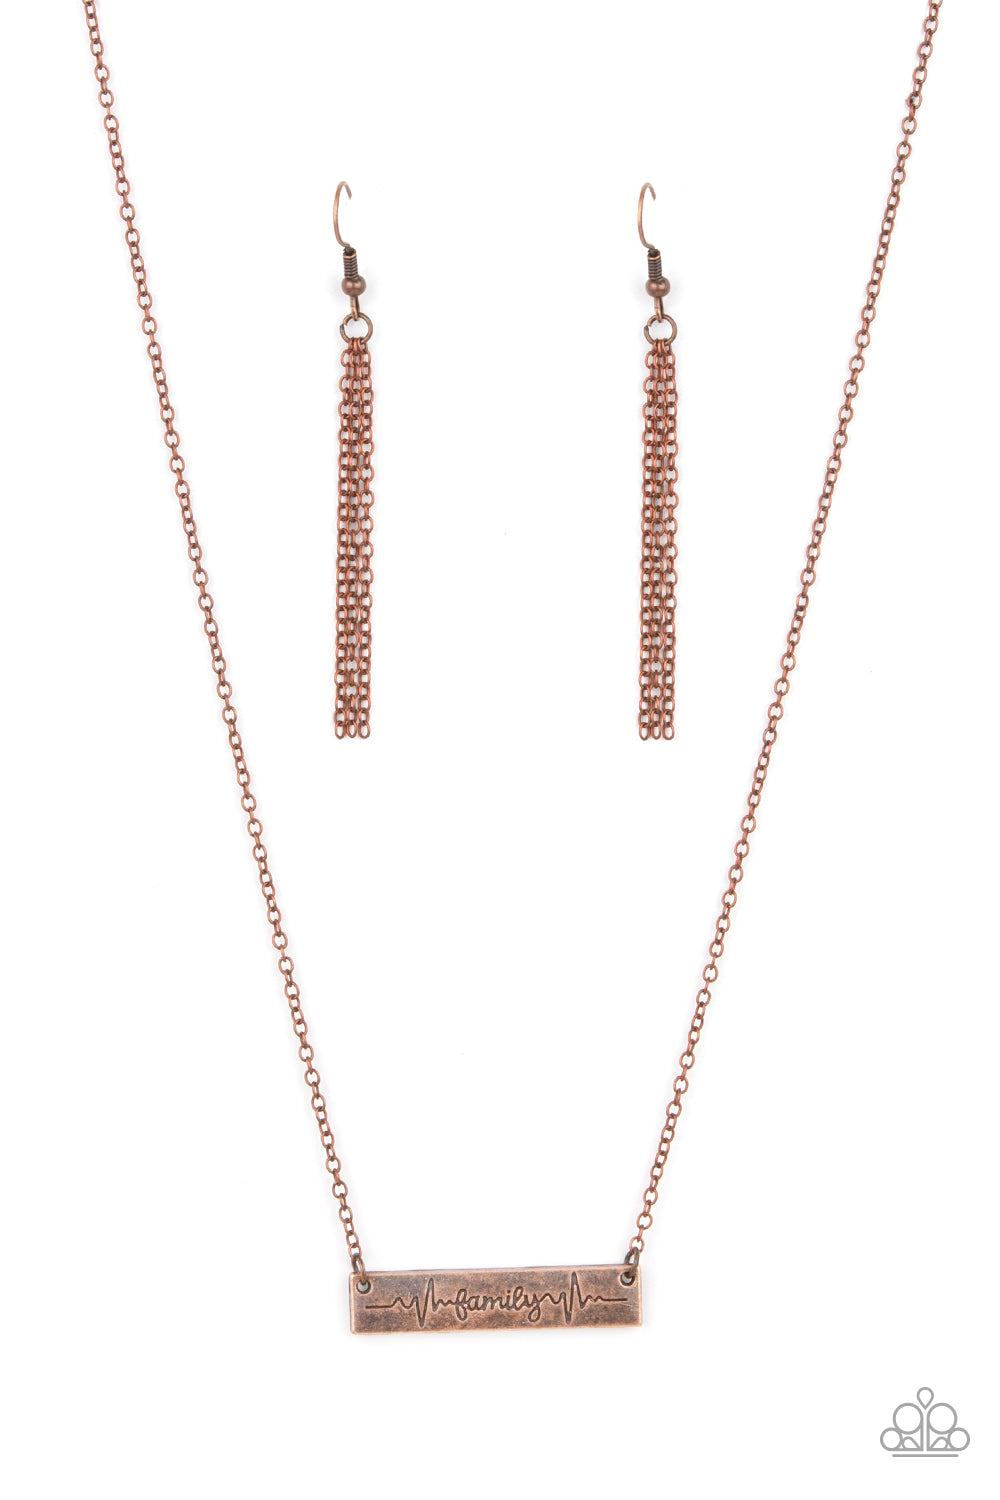 Living The Mom Life Paparazzi Accessories Necklace with Earrings - Copper